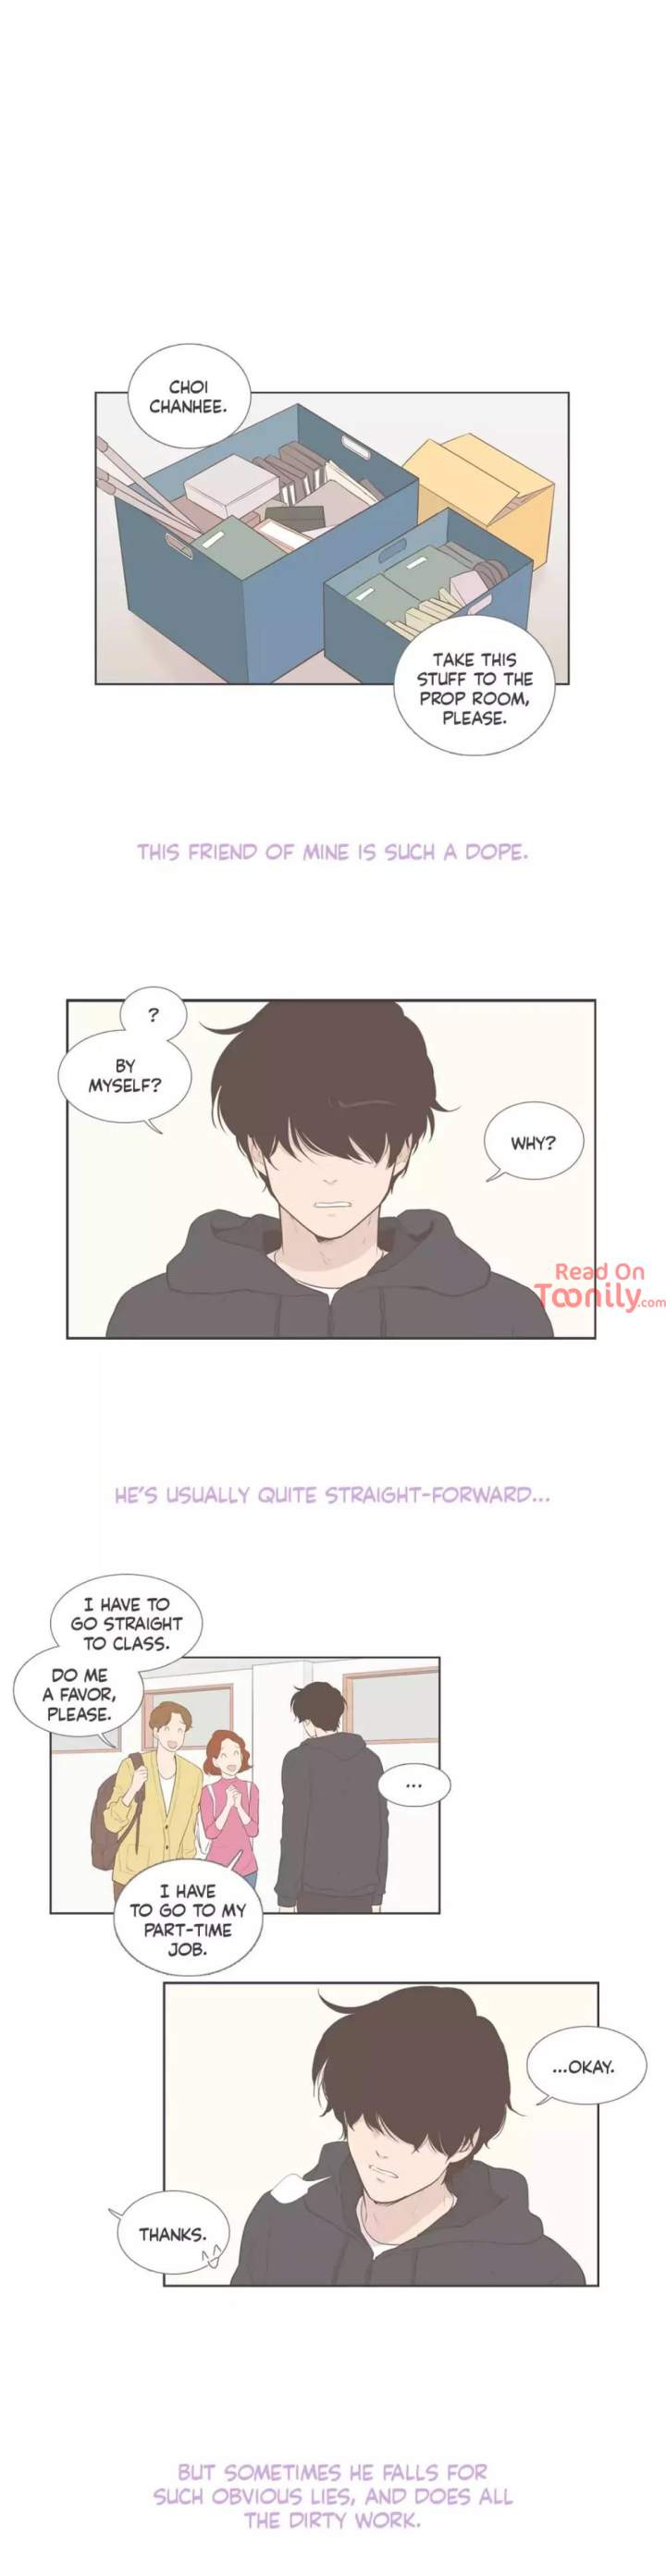 Something About Us - Chapter 101 Page 1